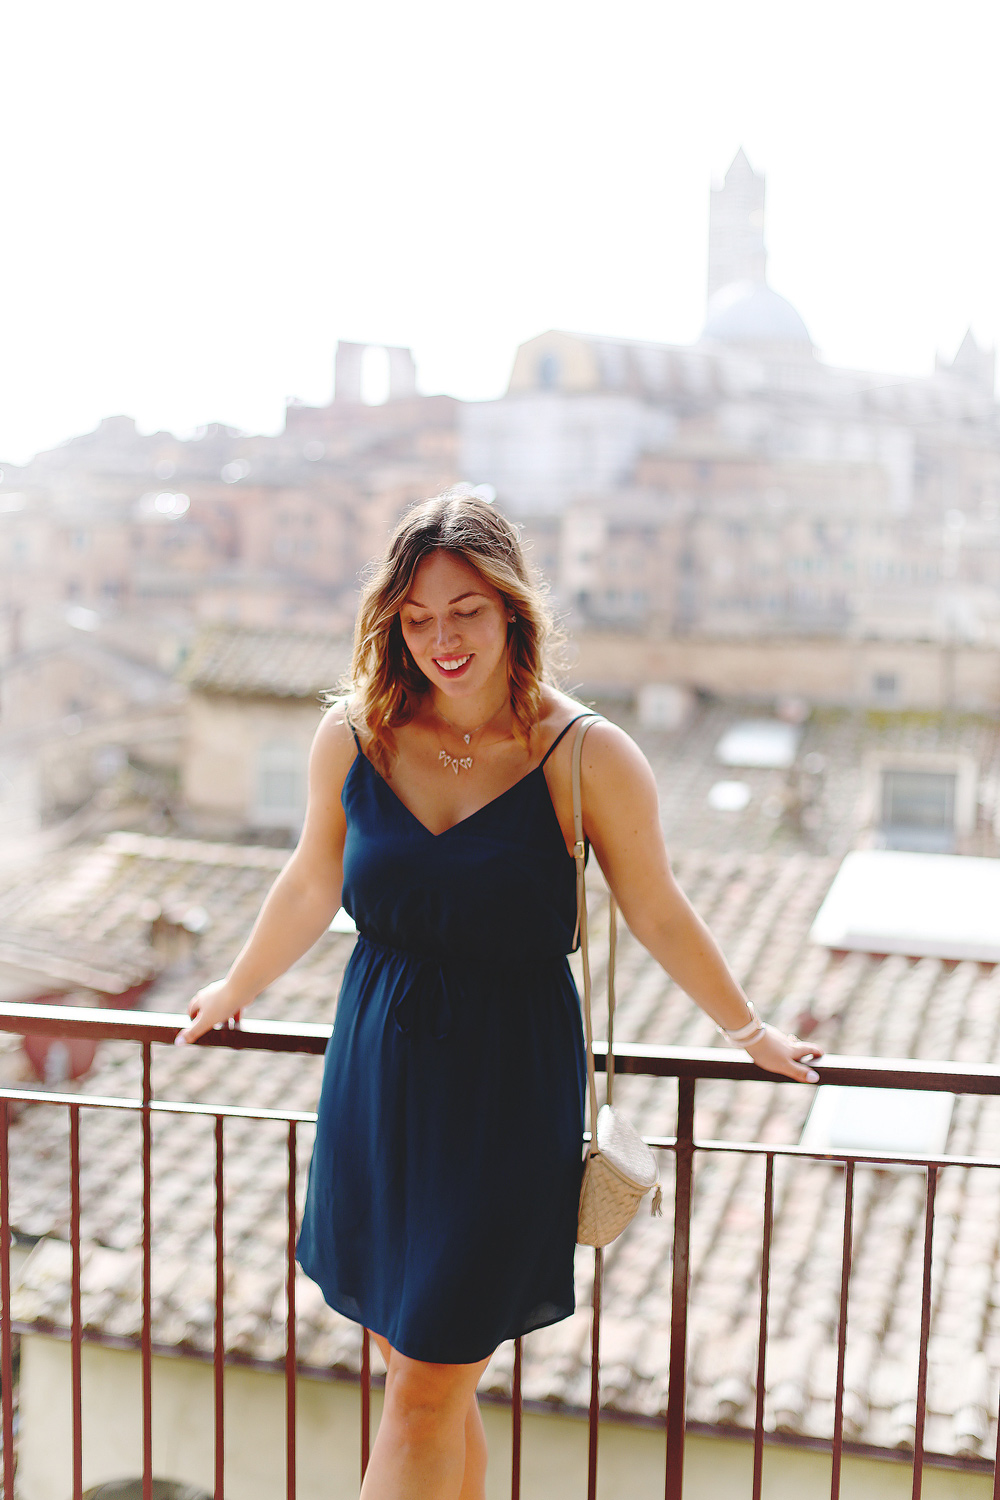 To Vogue or Bust shares jewelry stacking tips in Swarovski jewelry, Aritzia silk dress, Tieks flats and vintage Bottega Venata bag in Siena, Italy